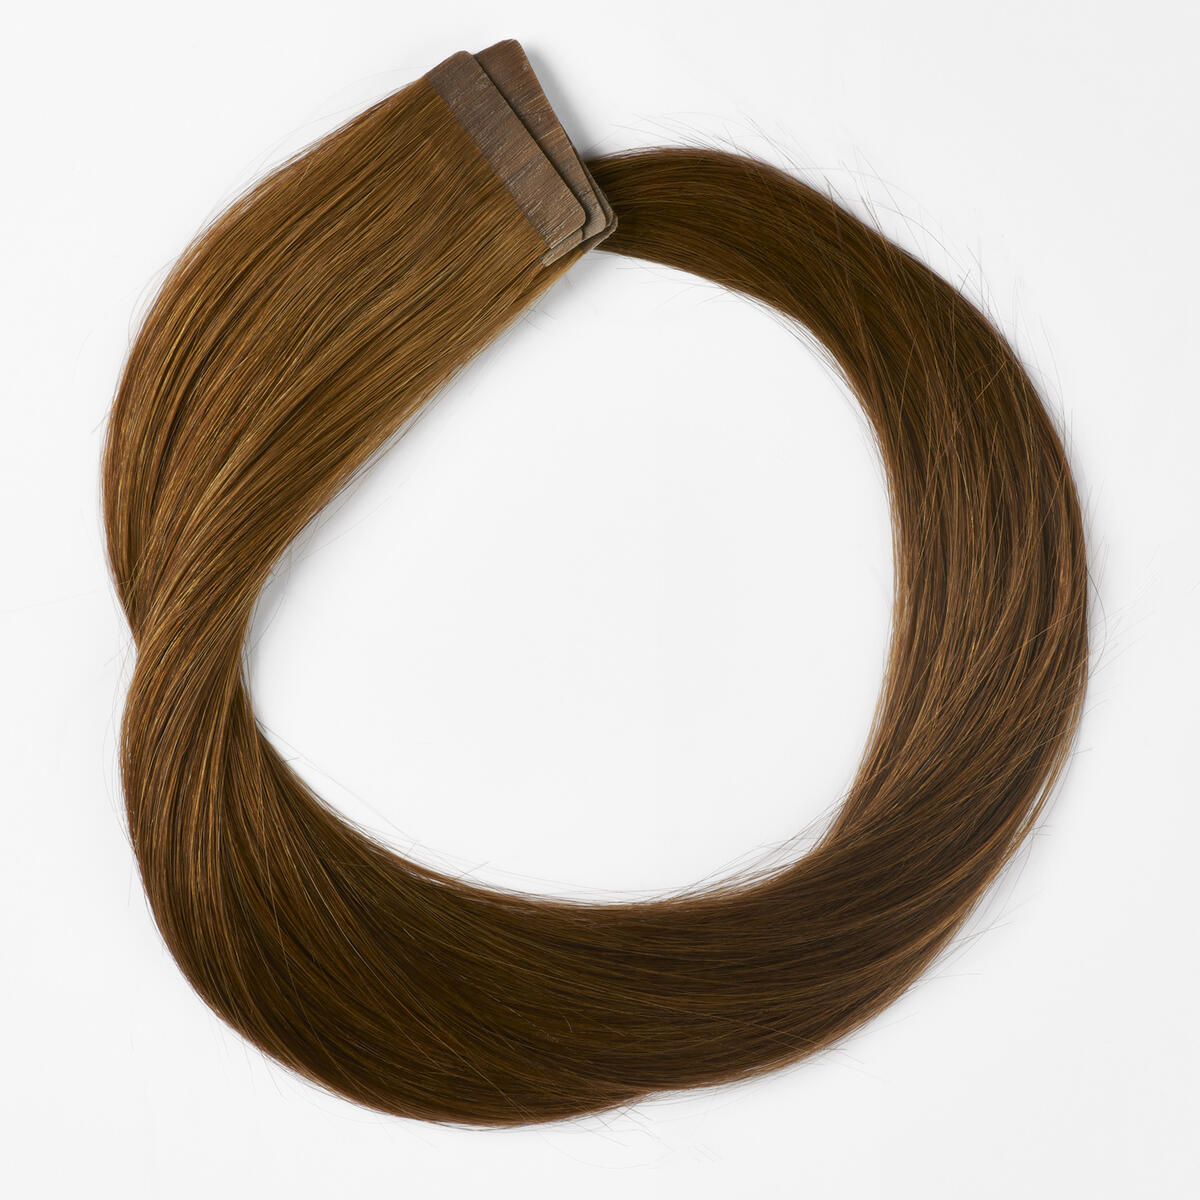 Basic Tape Extensions Classic 4 5.4 Copper Brown 30 cm